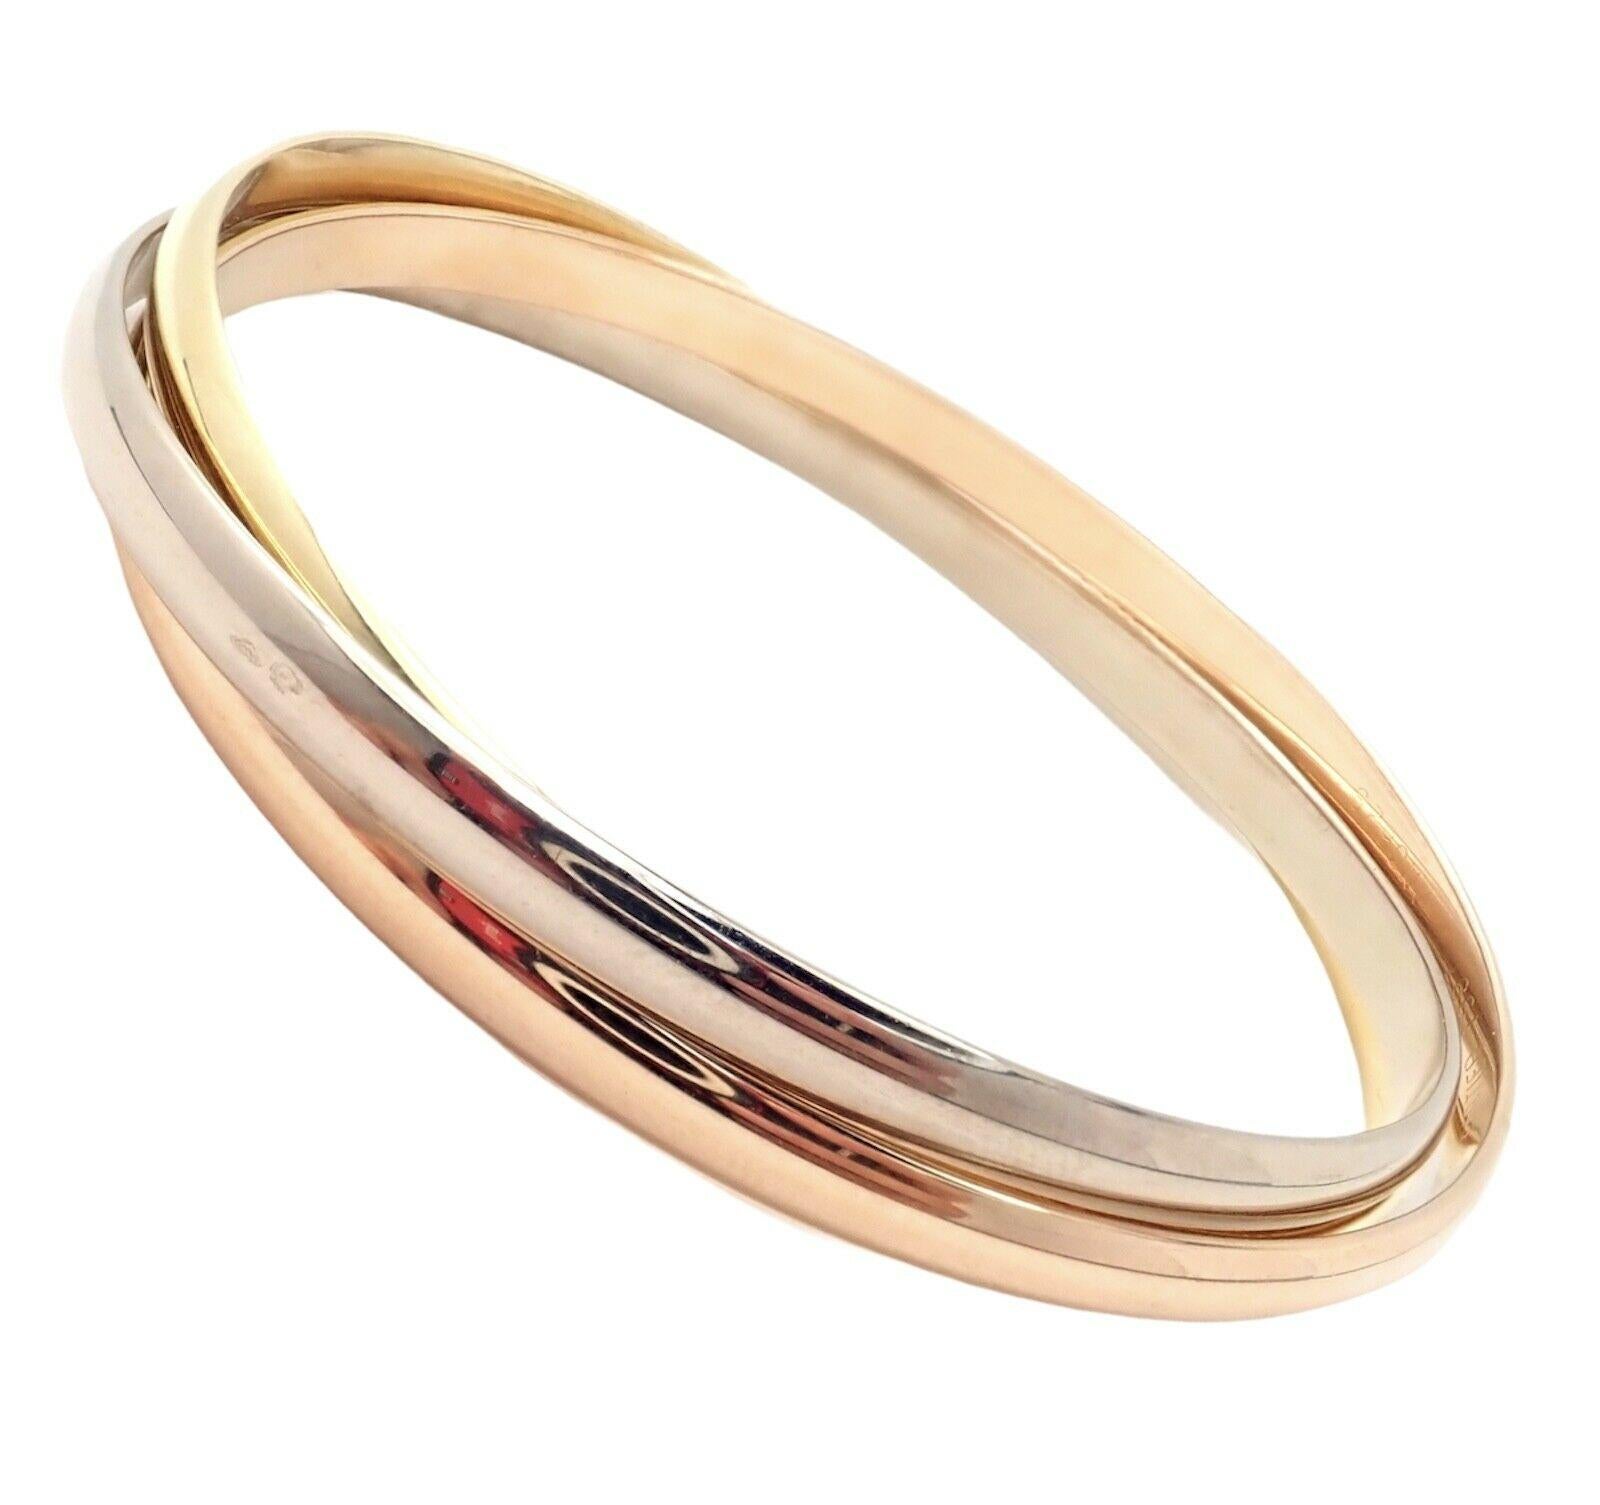 18k Tri-Colored Gold (Yellow, White, Rose) Trinity Rolling Bangle Bracelet by Cartier. 
Details: 
Length: 7 3/4